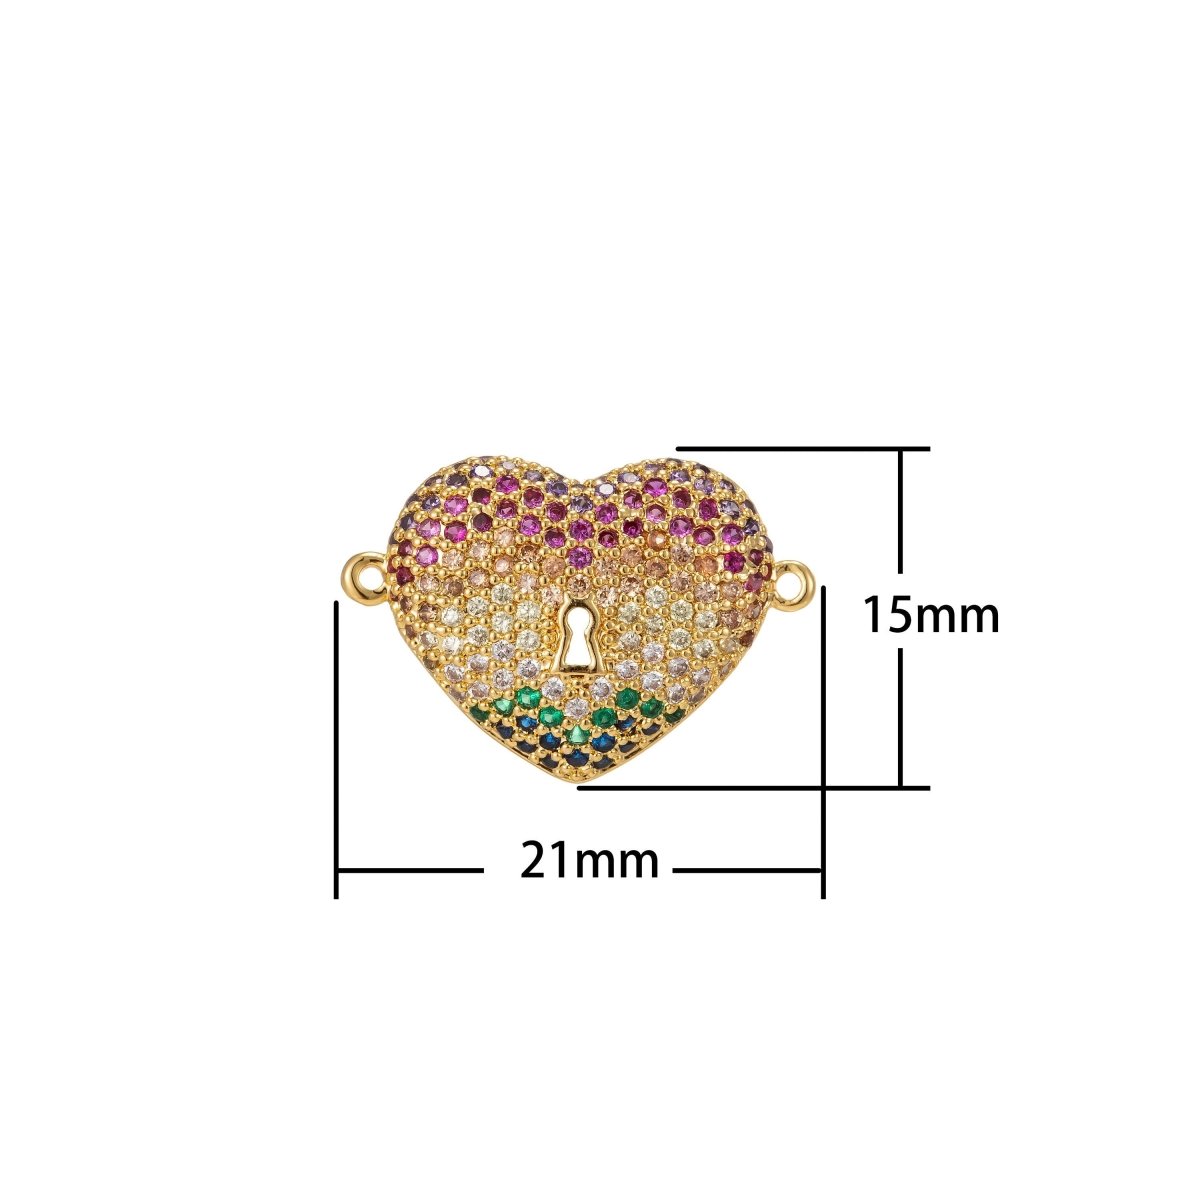 Gold Filled heart locket Charm Connector, locket Charm, gold locket Connector, CZ locket Necklace Bracelet Connector Link Charm F-312 - DLUXCA